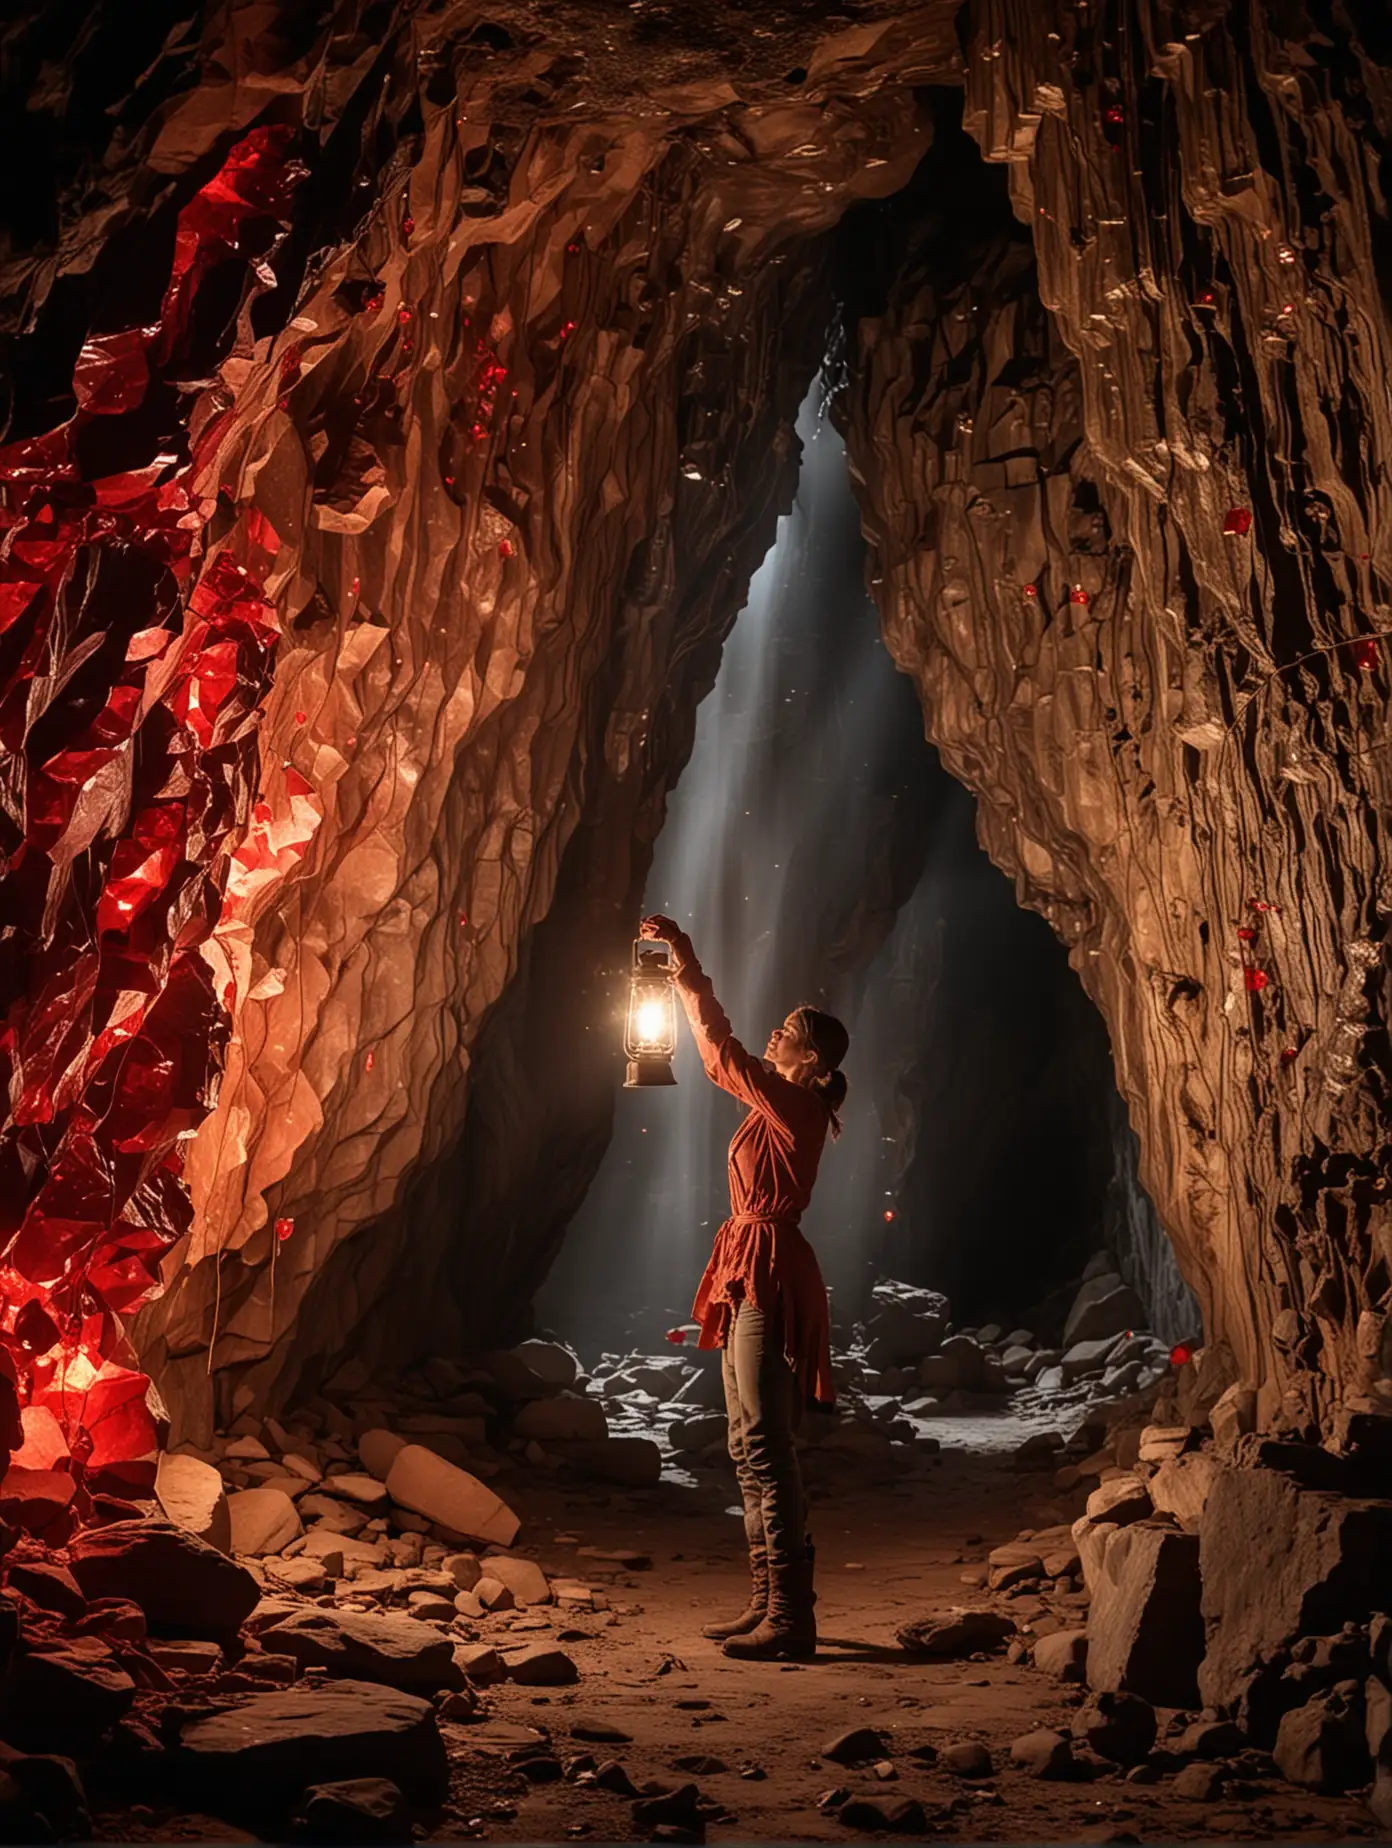 Exploring-a-Crystal-Cave-Woman-with-Lantern-and-Red-Crystal-Wall